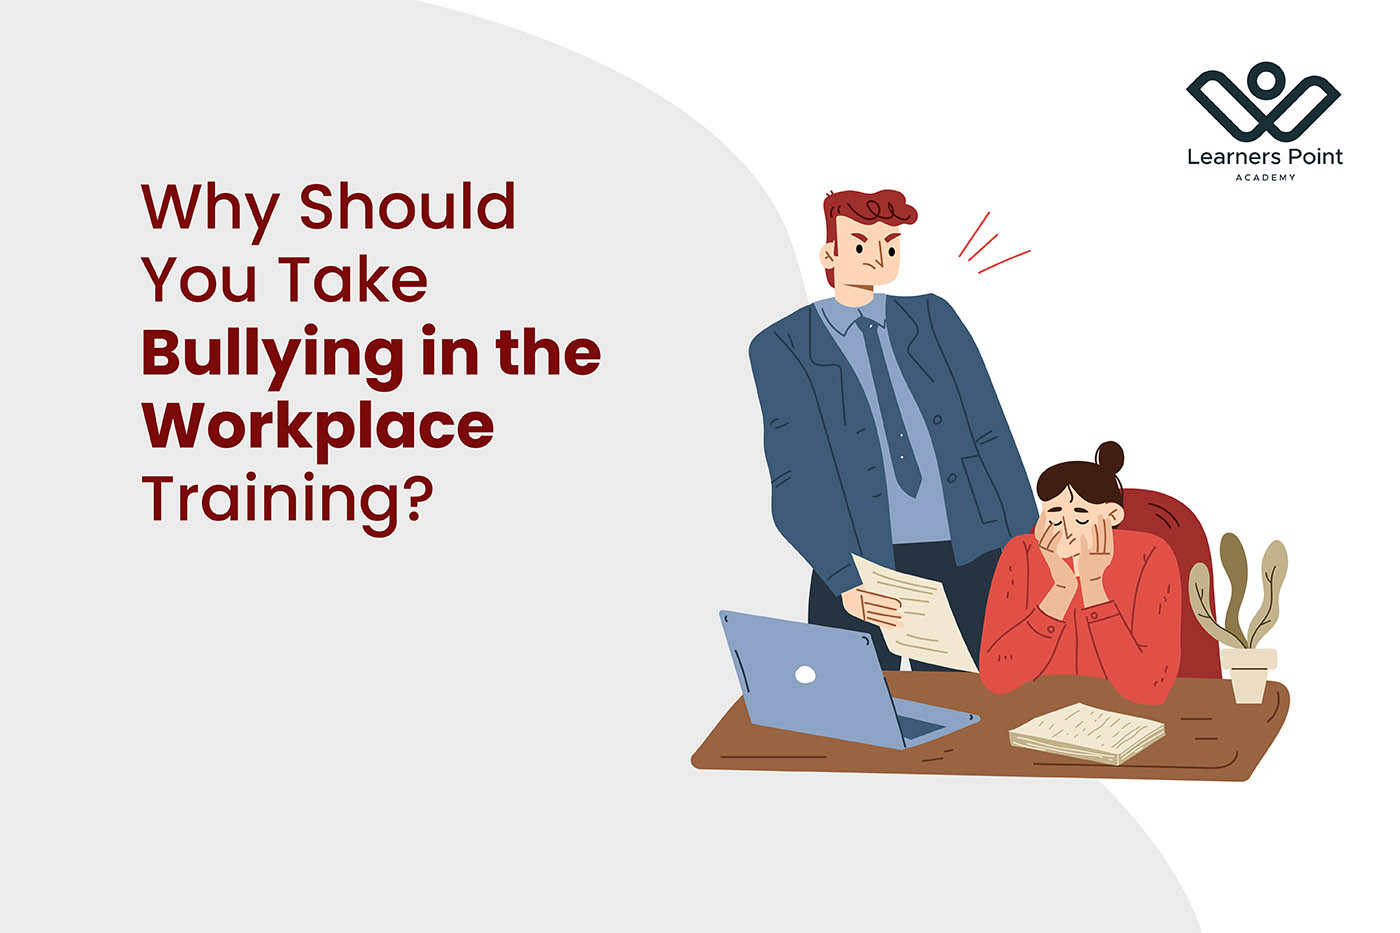 Why Should You Take Bullying in the Workplace Training?